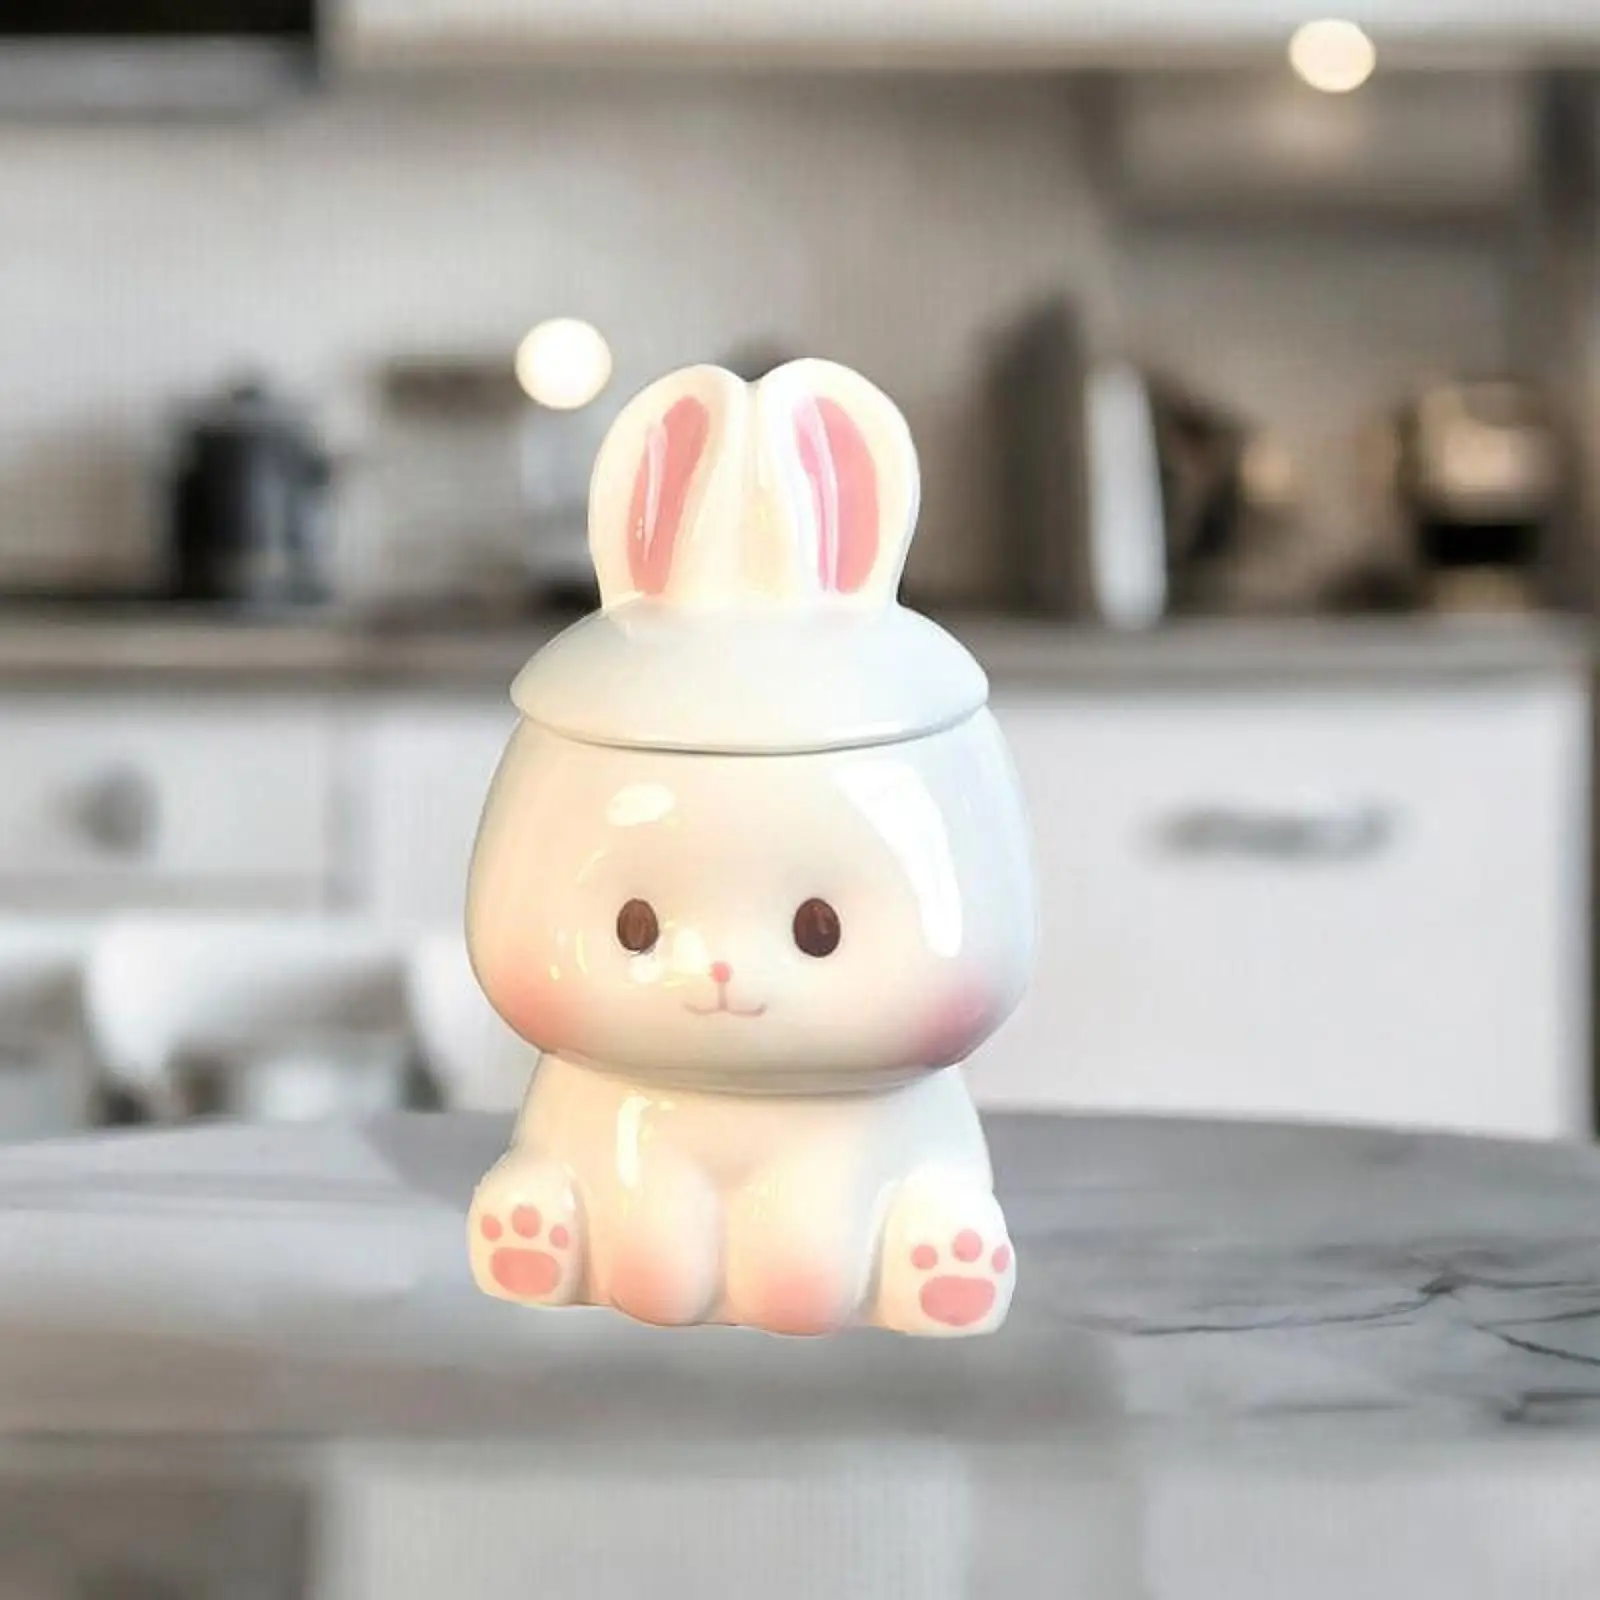 Cute Rabbit Mug with Lid and Handgrip Water Cup Creative 420ml Tabletop Decoration for Office Kitchen Home Decor Living Room